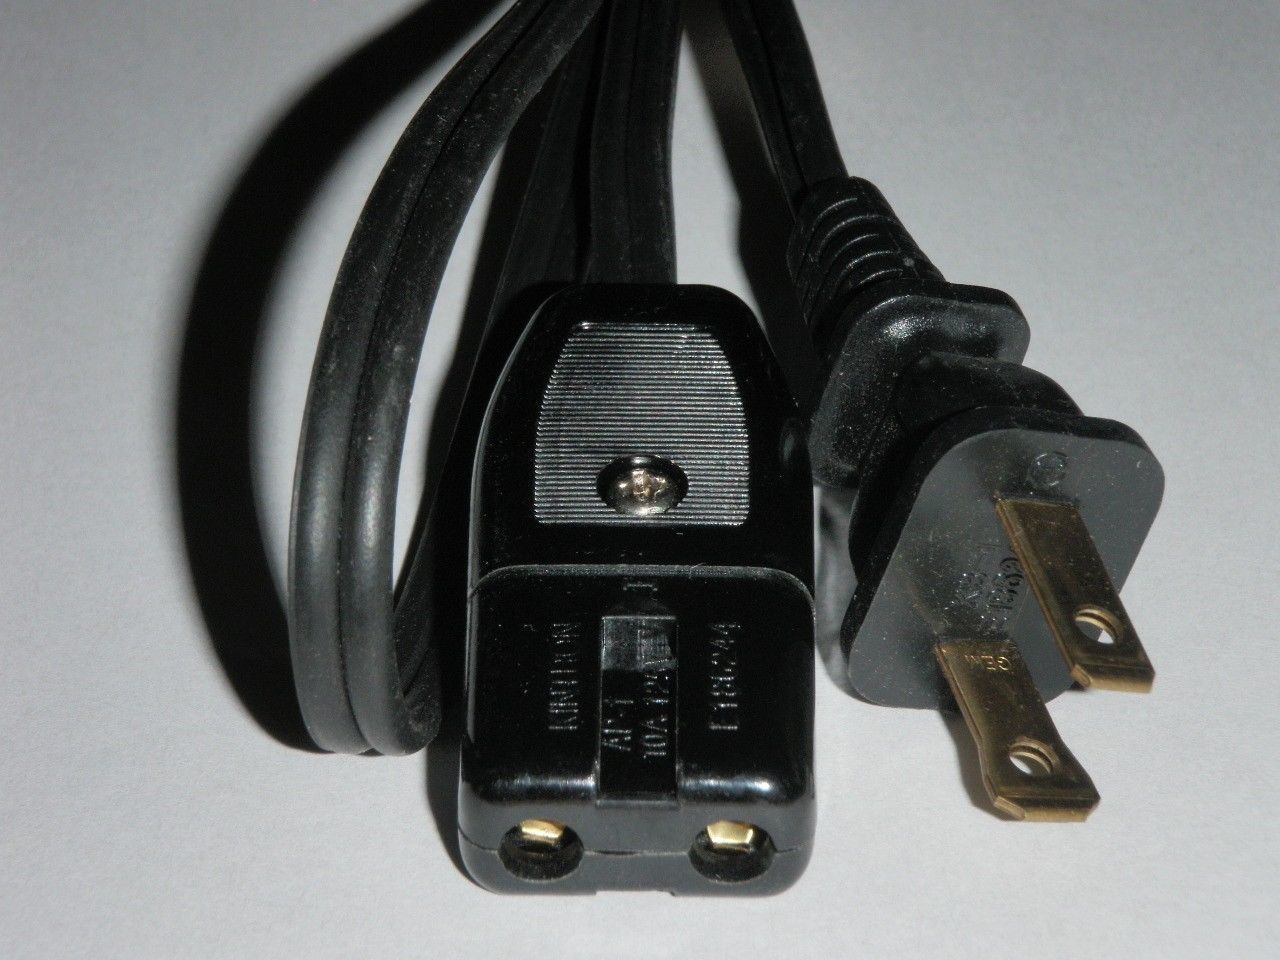 Power Cord for Cory Party Chef Electric Skillet Fry Pan Model DEC-3 (2pin 36") - $15.67